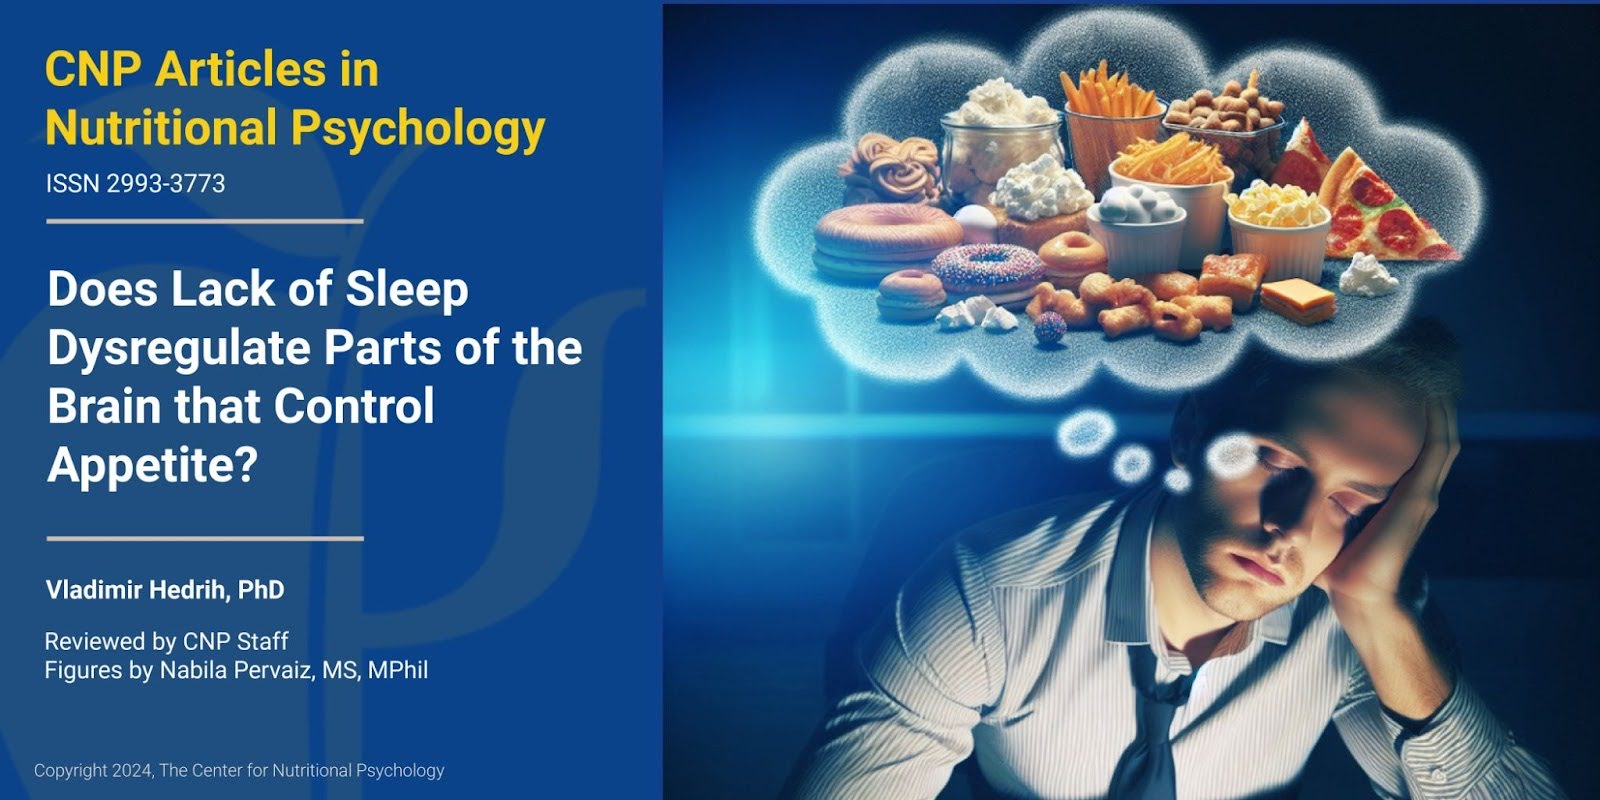 Does Lack of Sleep Dysregulate Parts of Our Brain that Control Appetite?